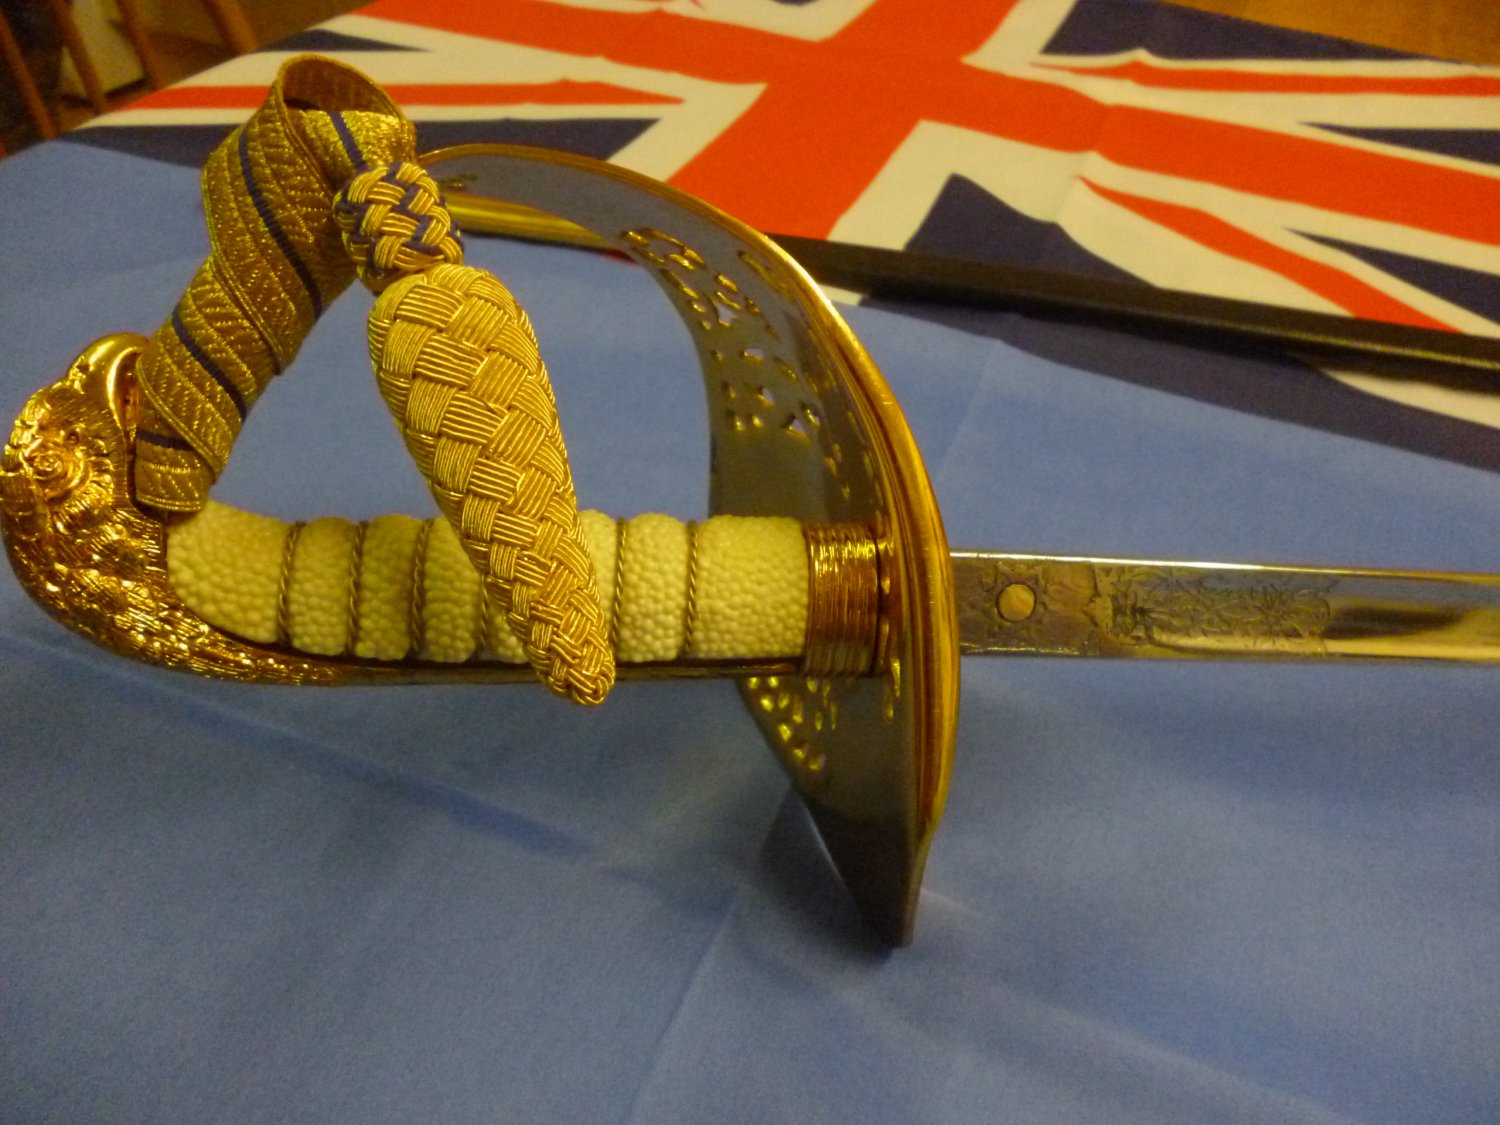 British RAF Royal Air Force Officer's Ceremonial Sword and Knot